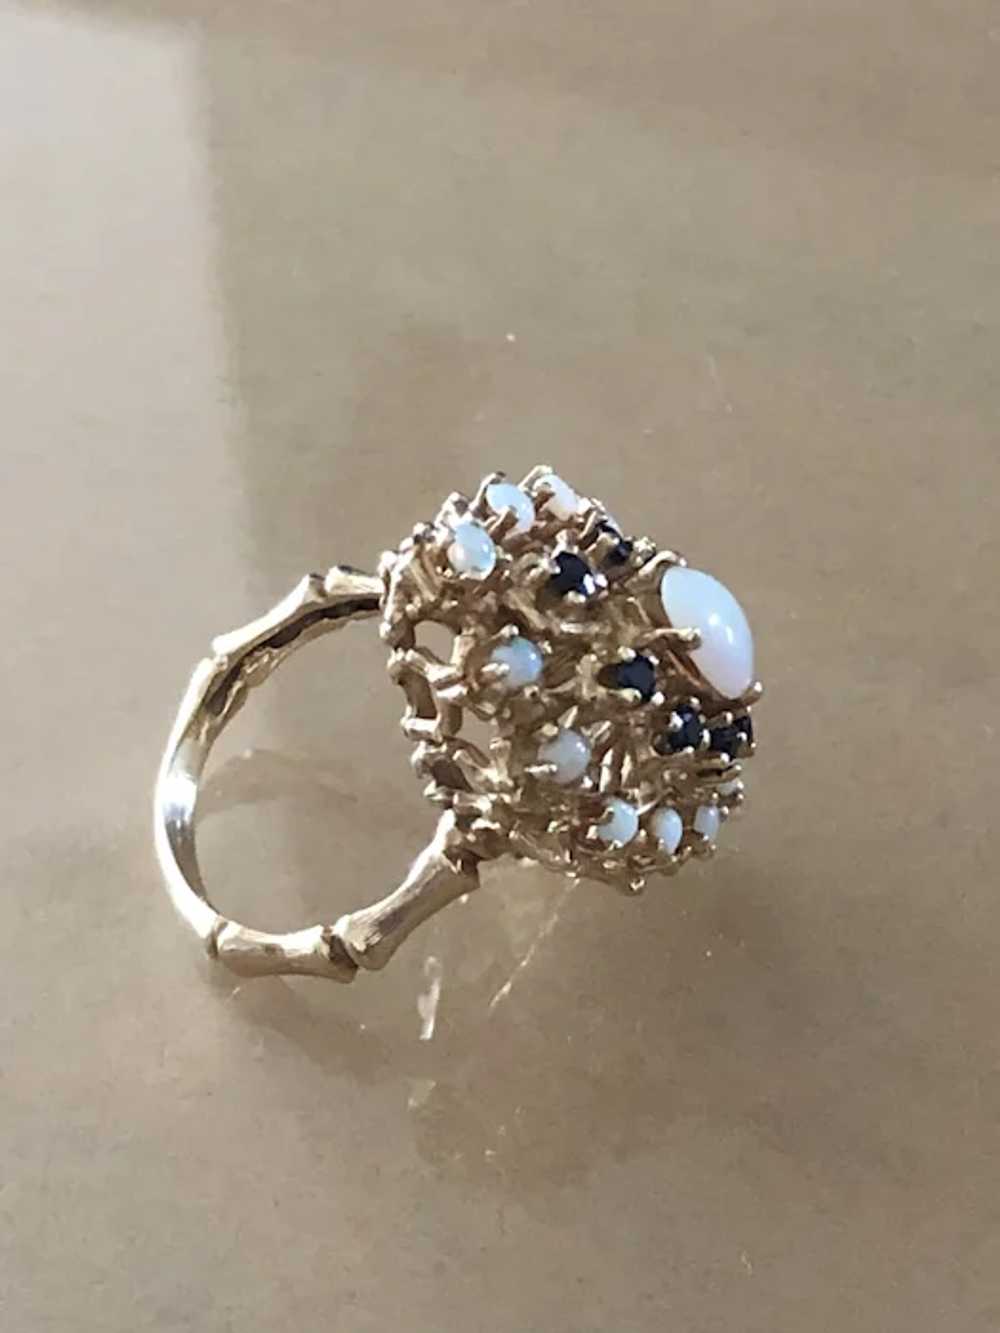 Opal & Sapphire Cocktail Ring - image 3